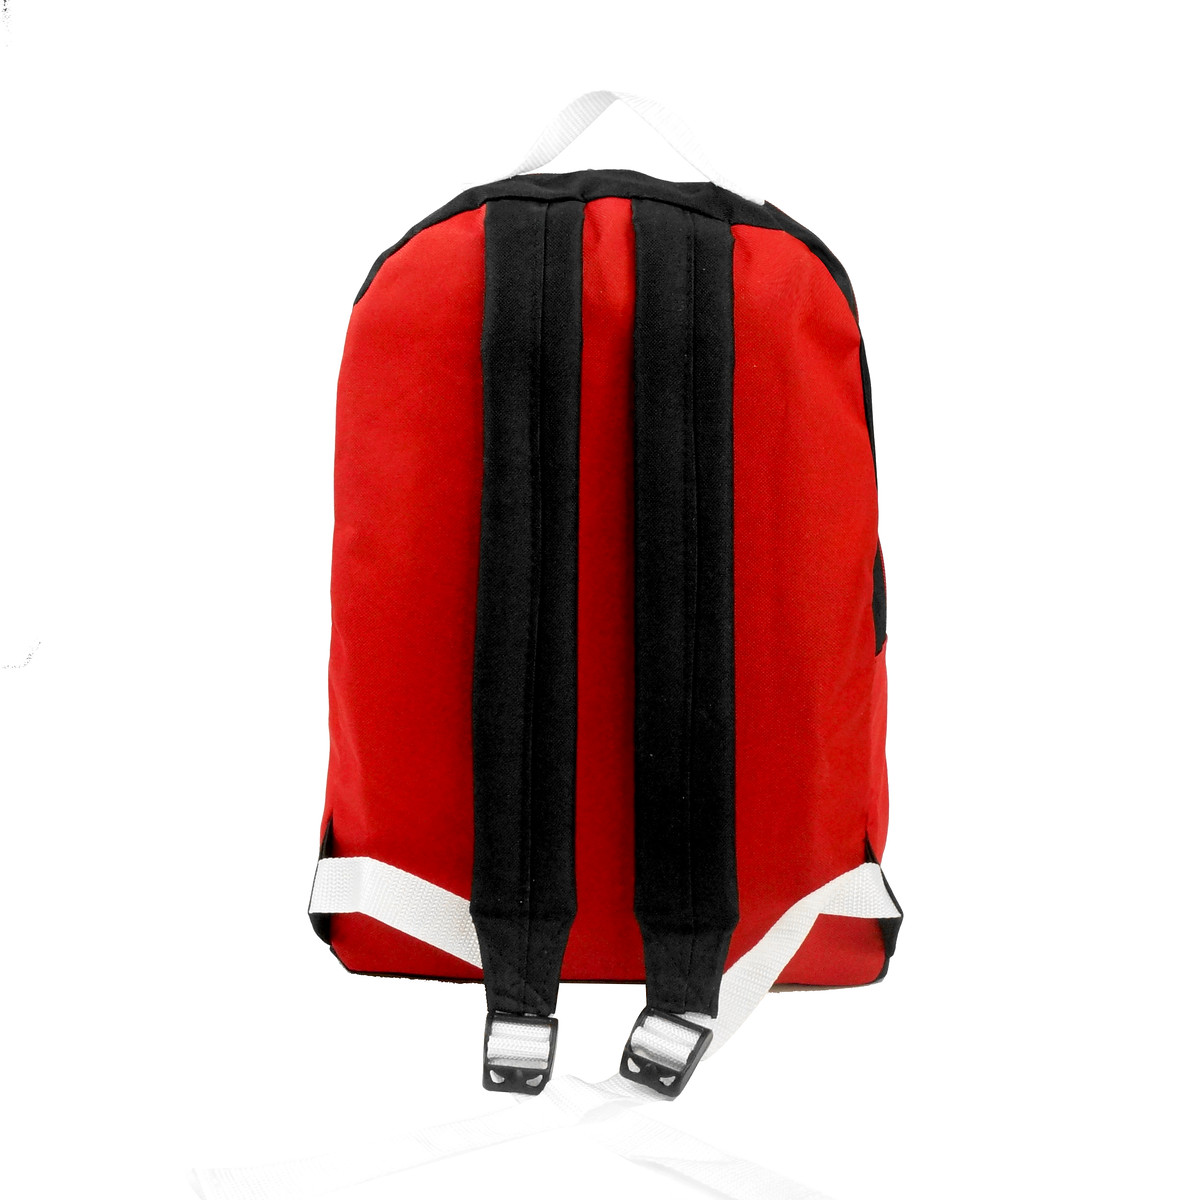 K-Cliffs 15" Lightweight Backpack, Daypack Bungee Water Resistant for Travel School and College, Unisex Color for Casual Everyday Kids & Teens (Red) - image 2 of 7